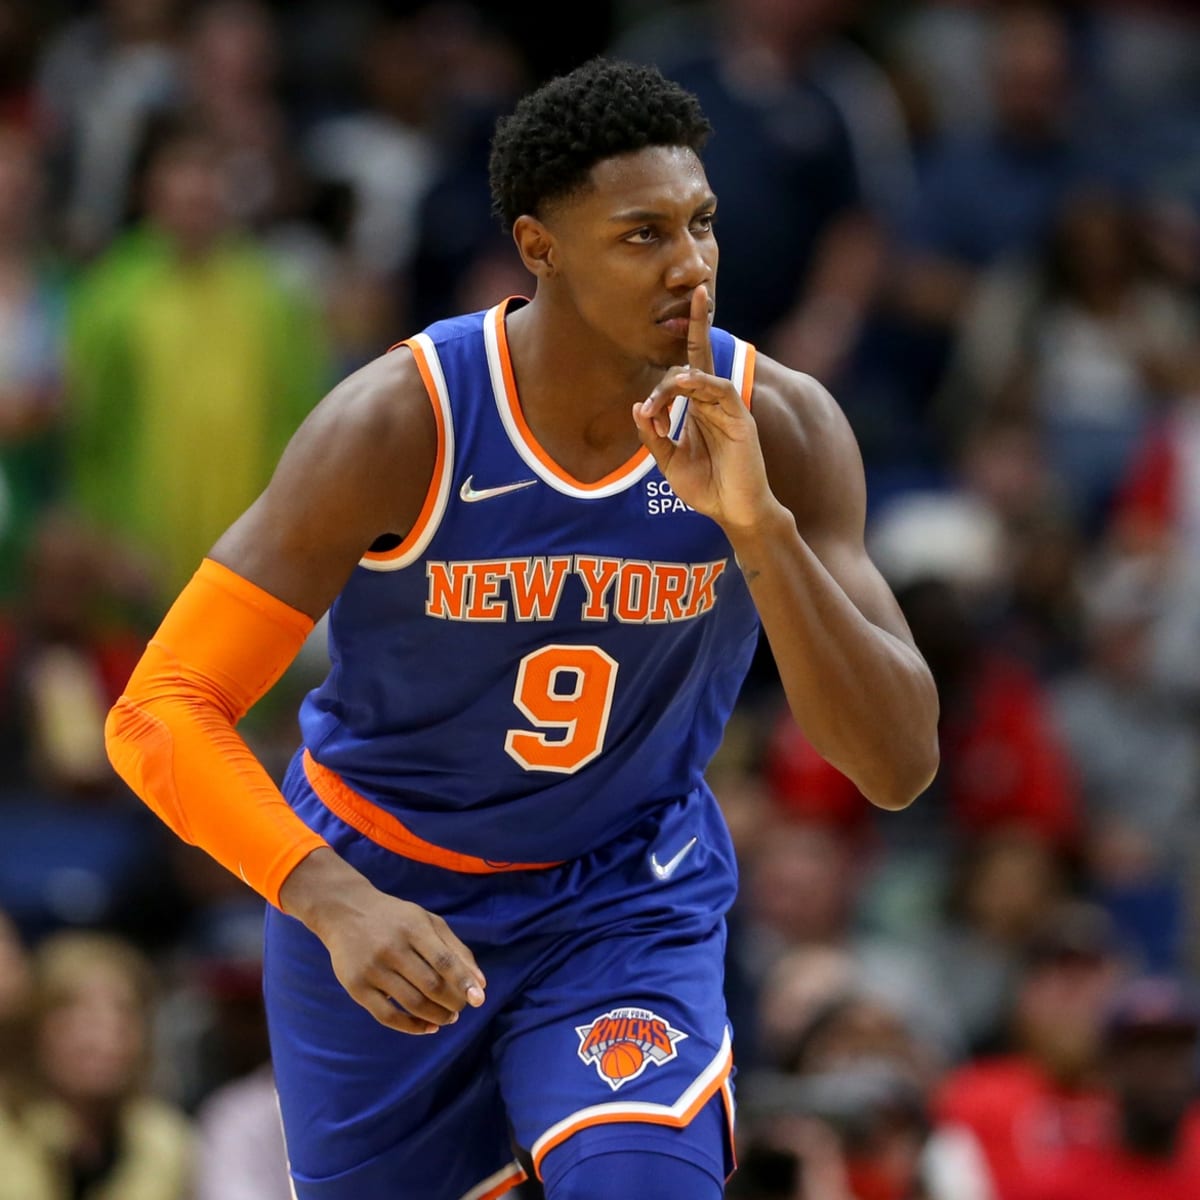 vrede Verbazing Positief Here's The Photos RJ Barrett Posted To Instagram After The Knicks Beat The  Kings - Fastbreak on FanNation